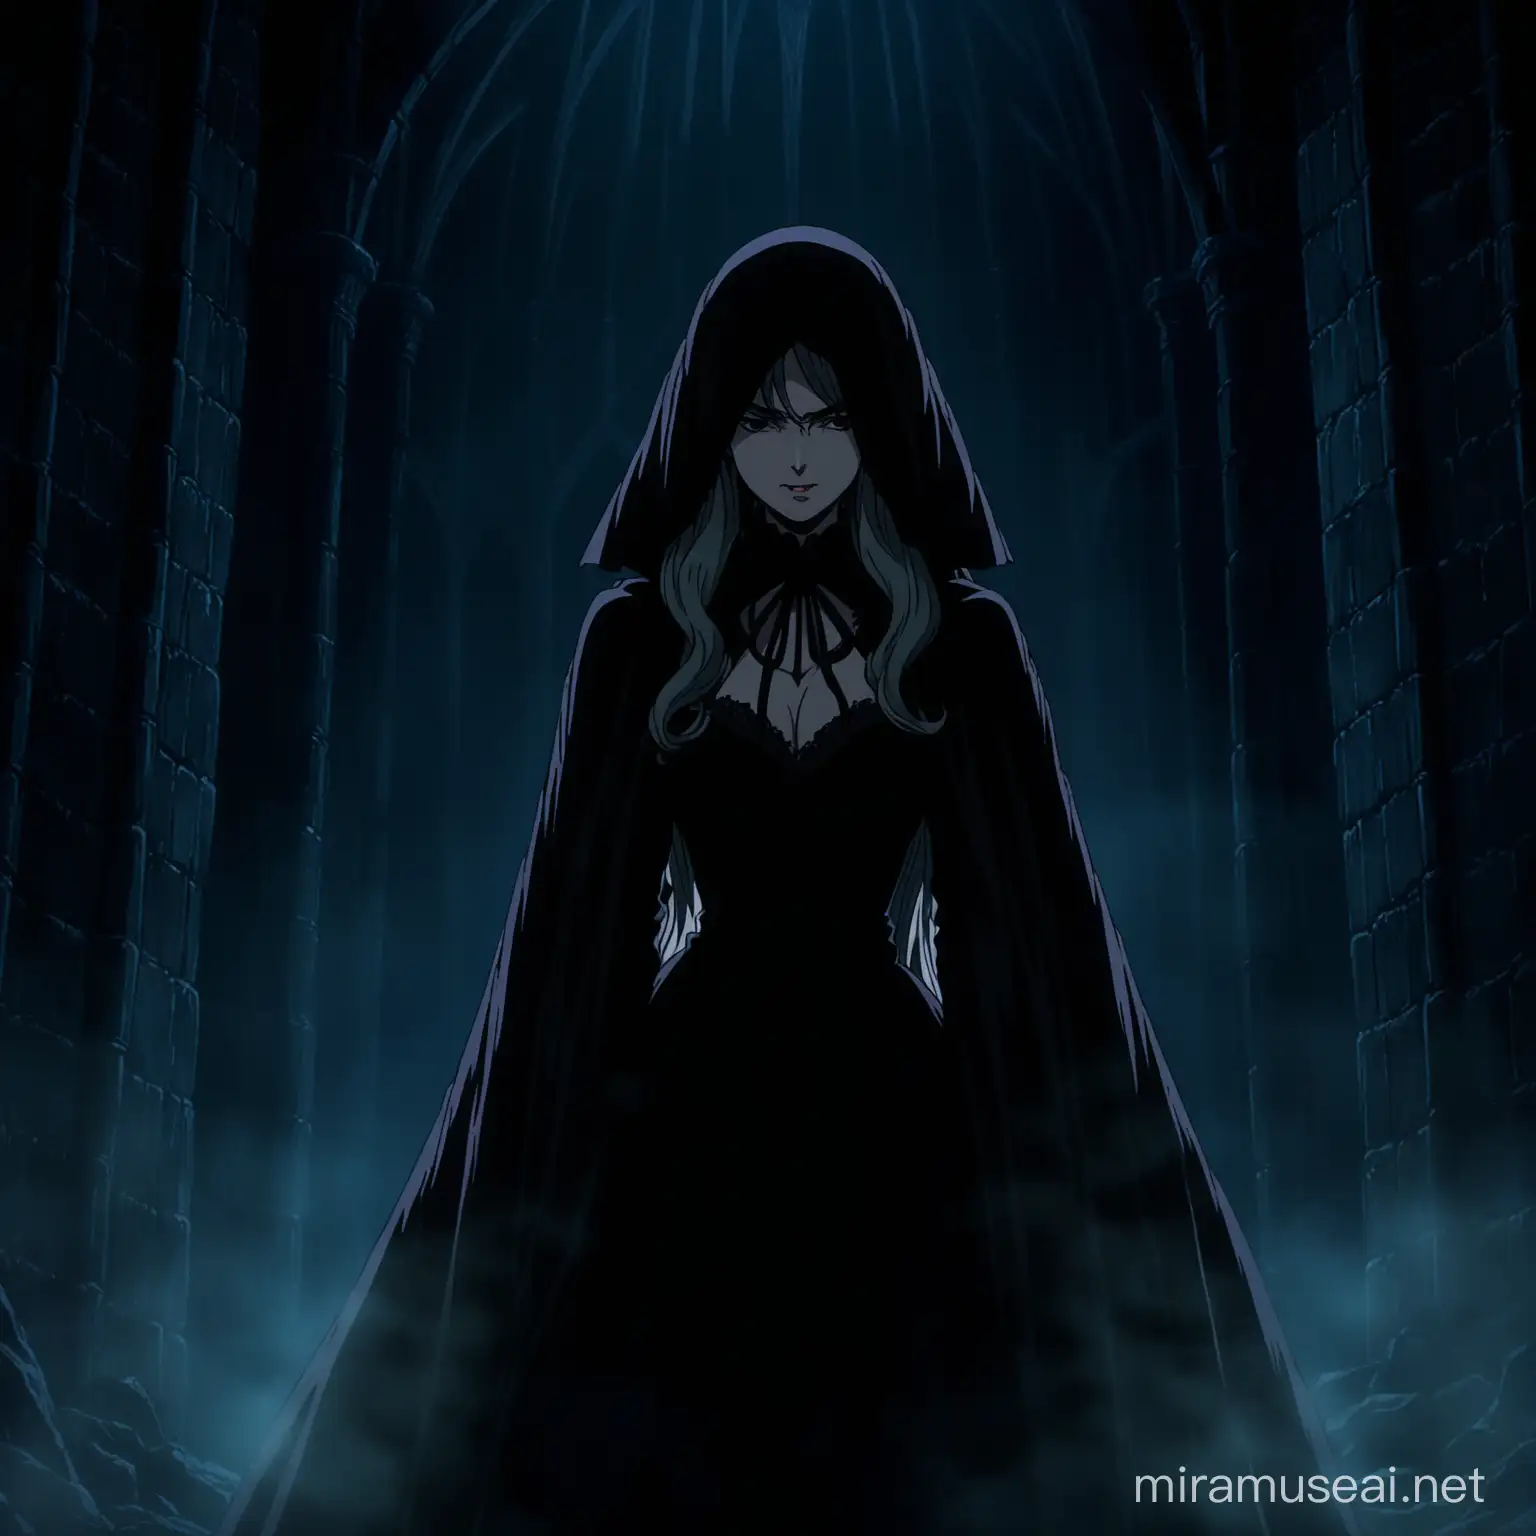 A victorian lady wearing a black dress and a long black veil that covers her entire face, hd, dramatic lighting, detailed, 90s anime, 80s anime, dark colors, castlevania symphony of the night style, berserk style, vampire Hunter d style, ghibli studio style, anime screencap, bloodborne style.